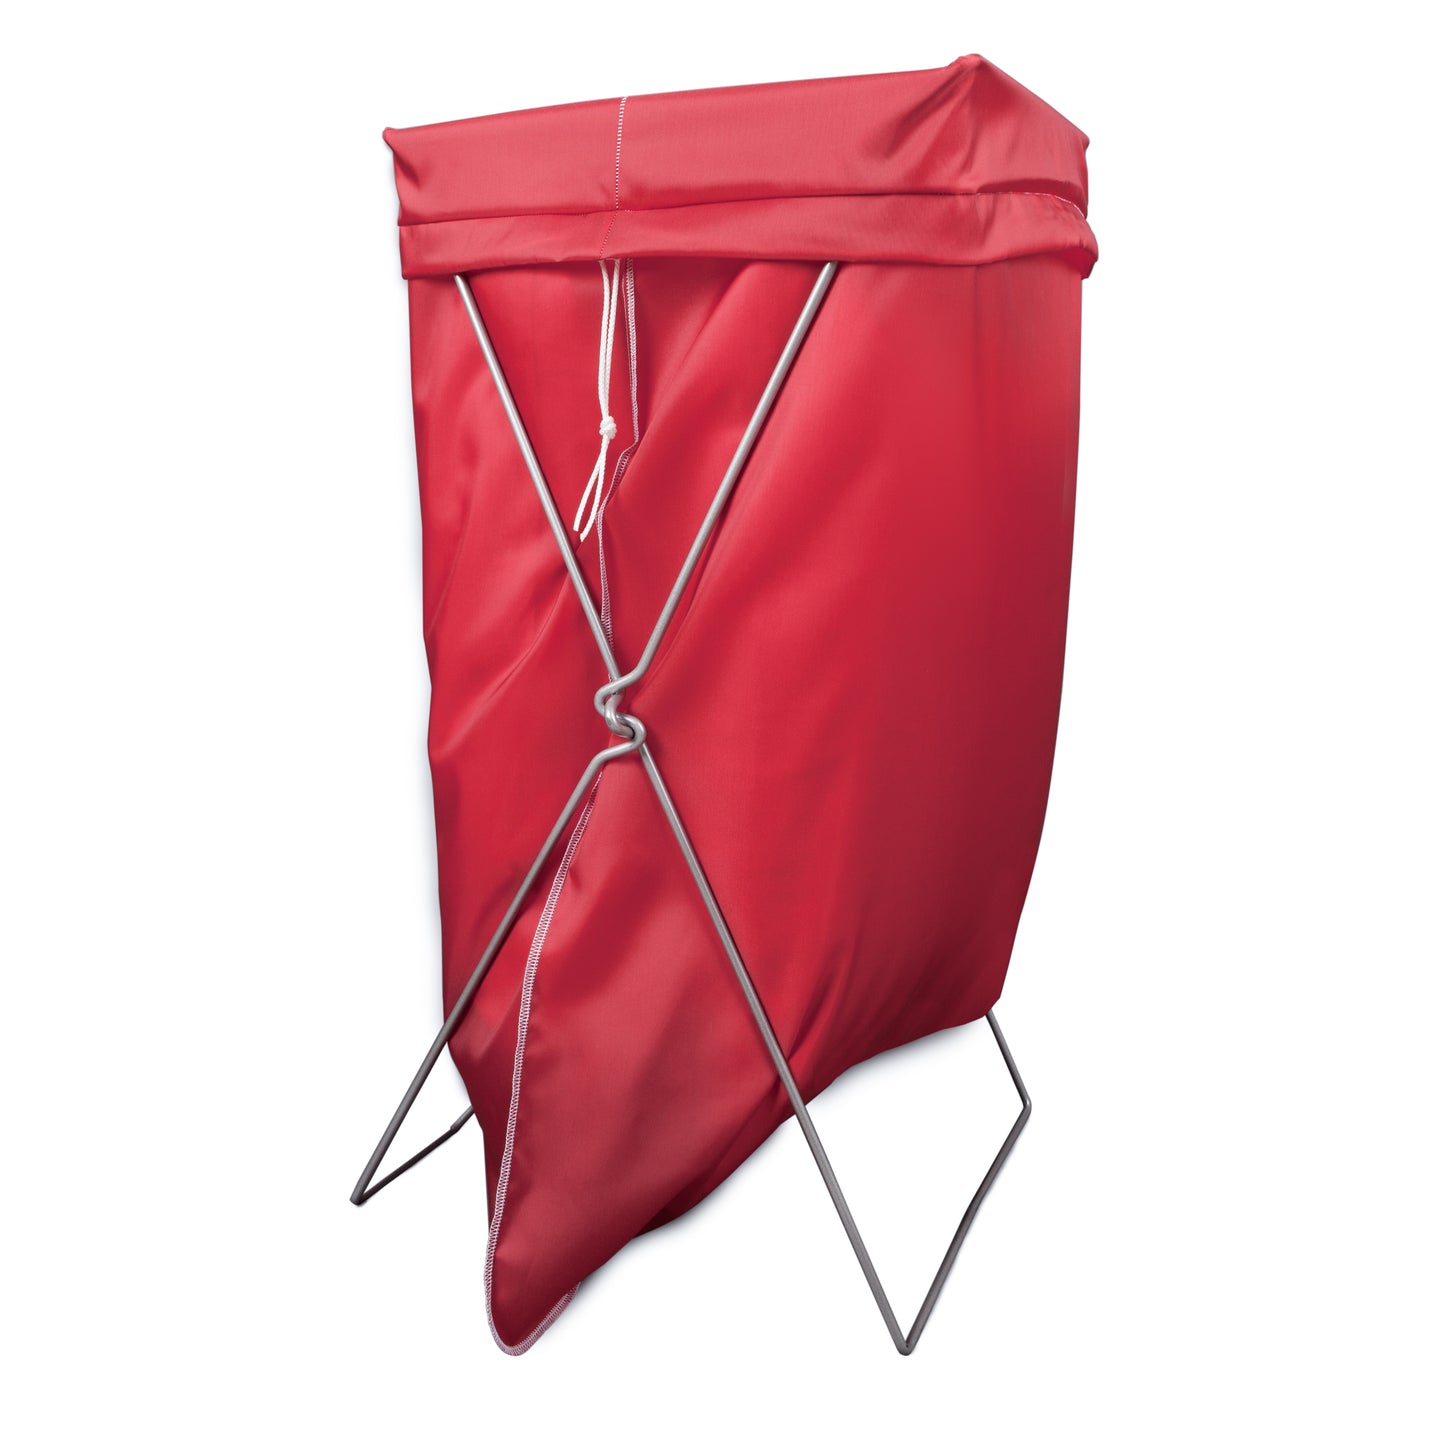 Laundry Bag, 30x40 inch, Red